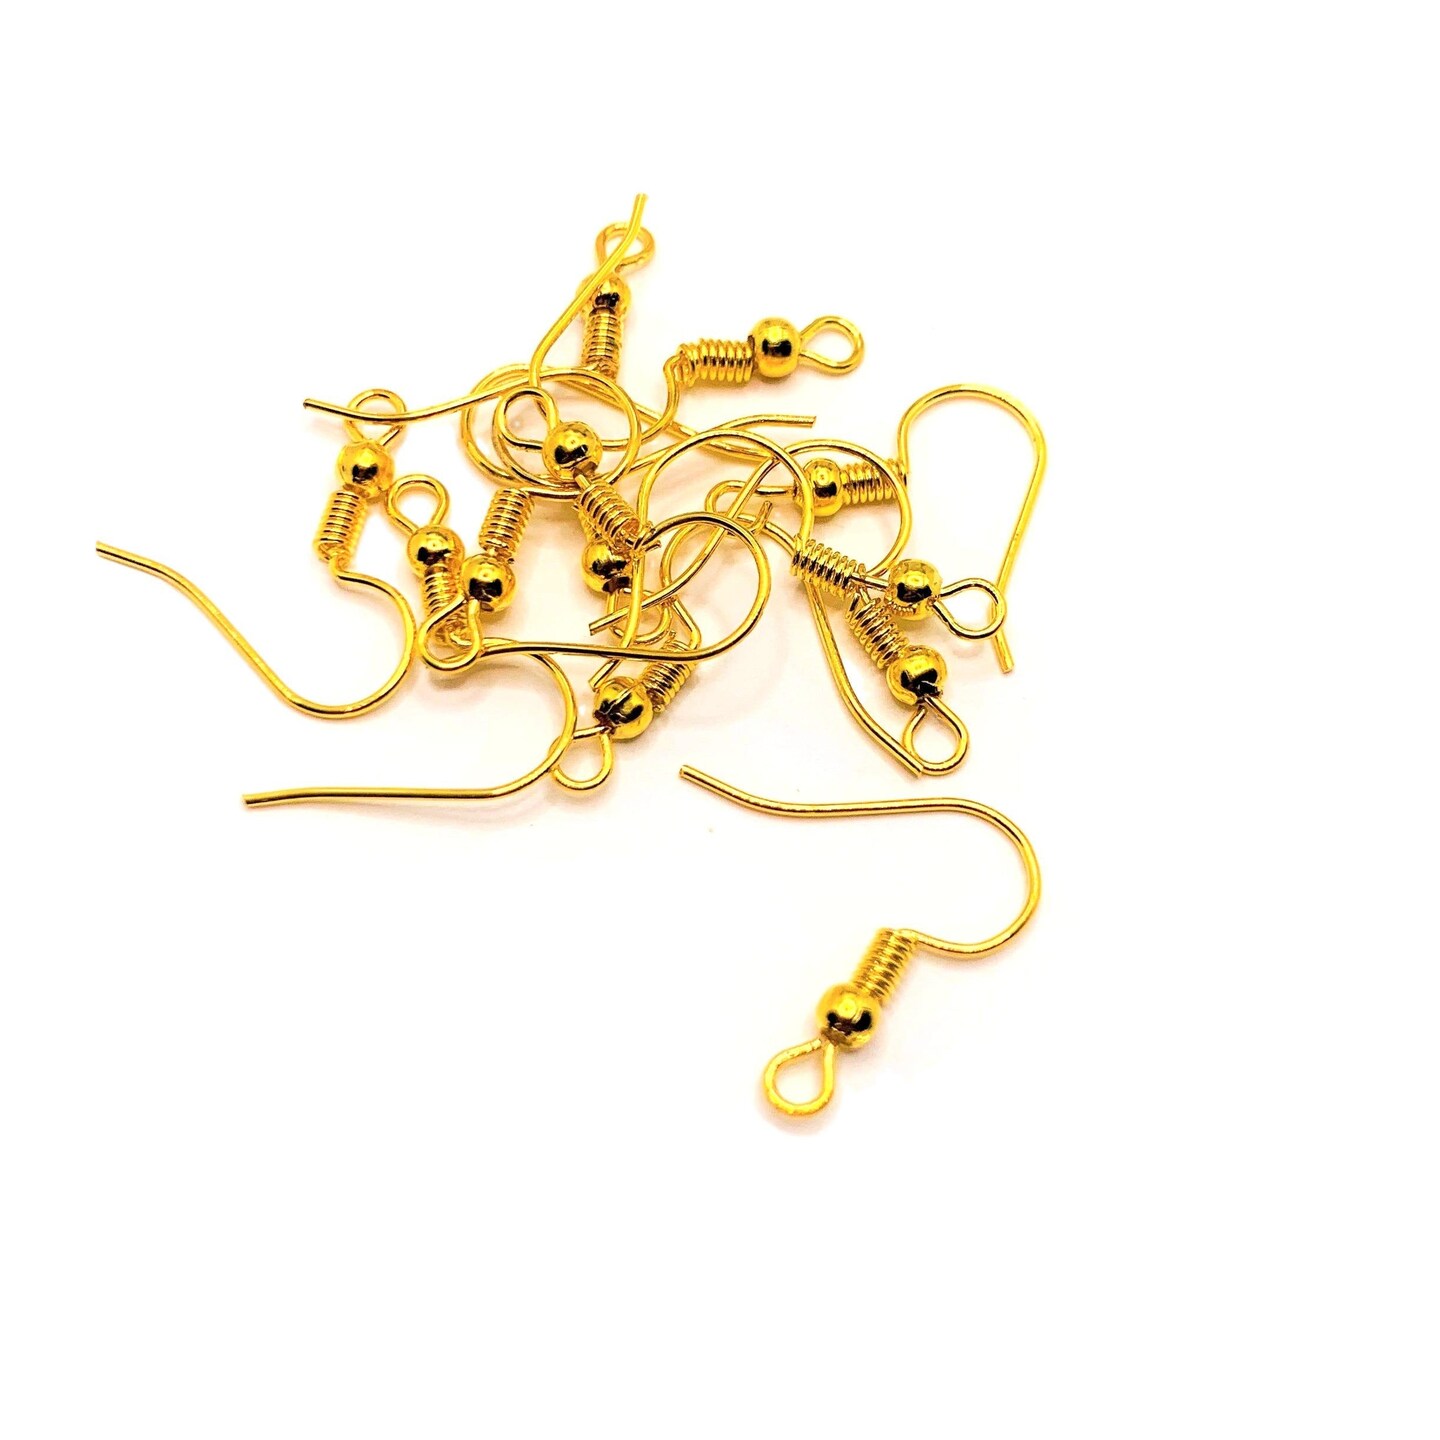 100 or 500 Pieces: Gold Plated Fish Hook Earring Wires with Spring